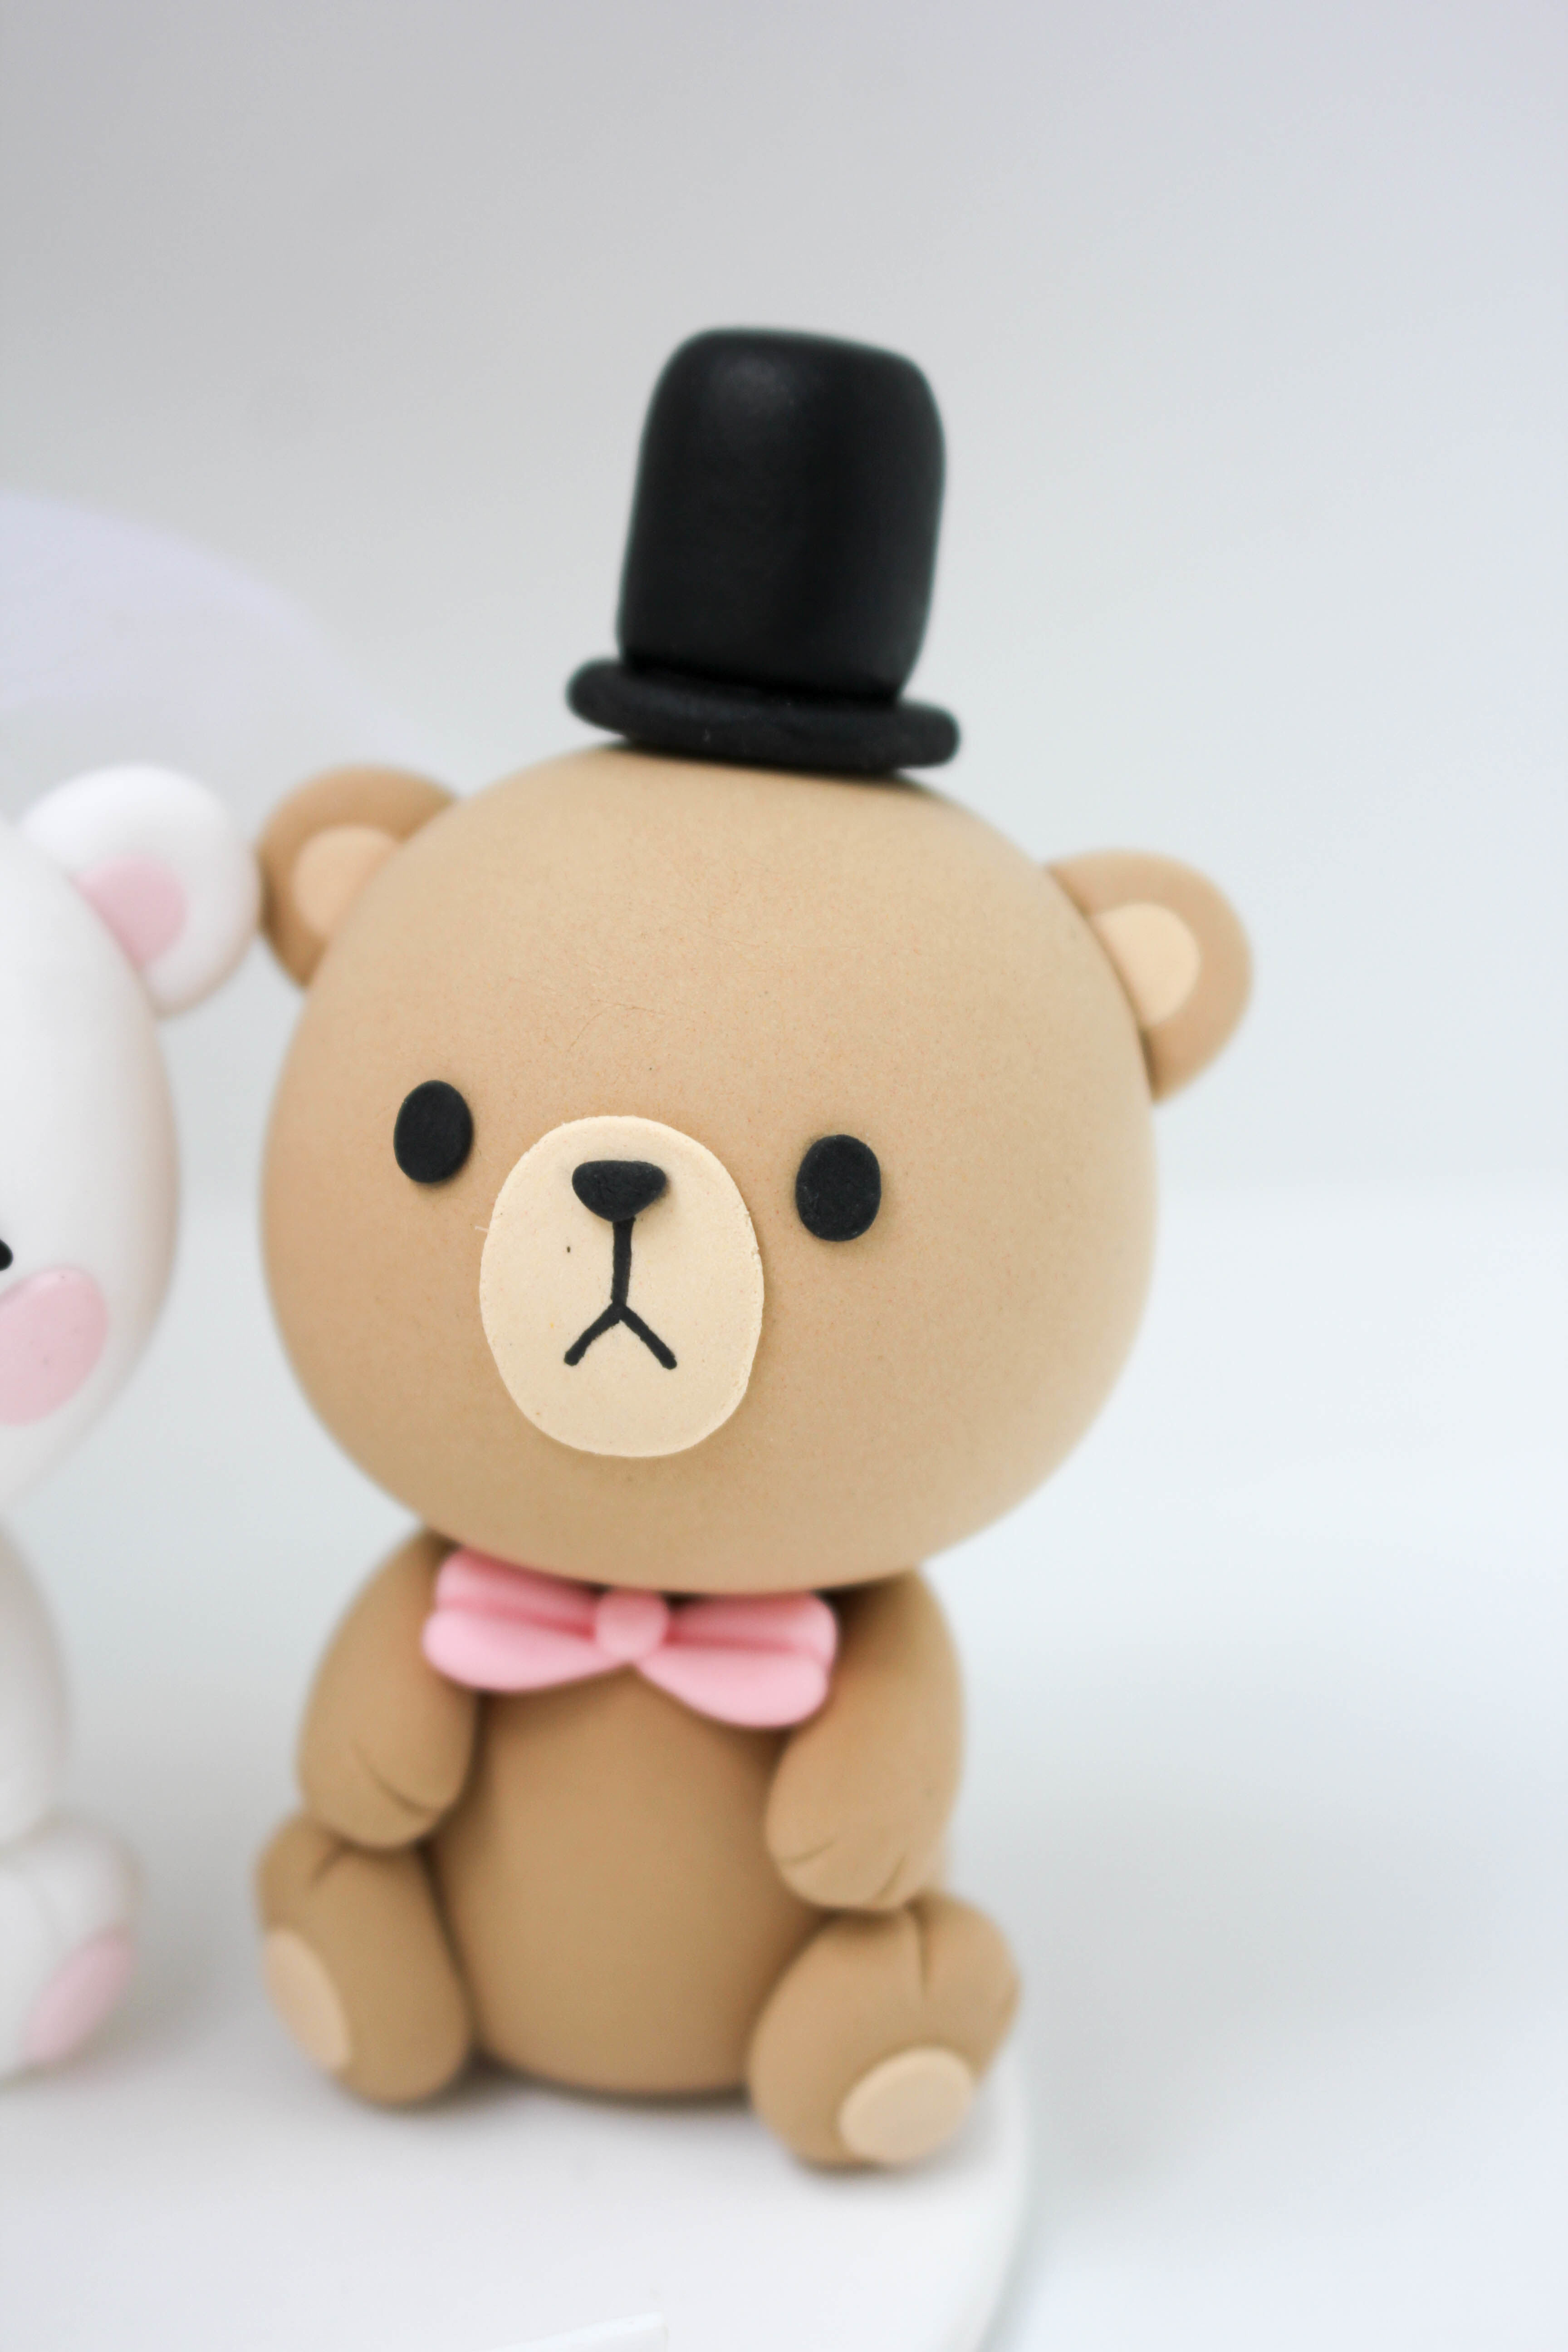 Unique gay and lesbian cake toppers • Offbeat Wed (was Offbeat Bride)